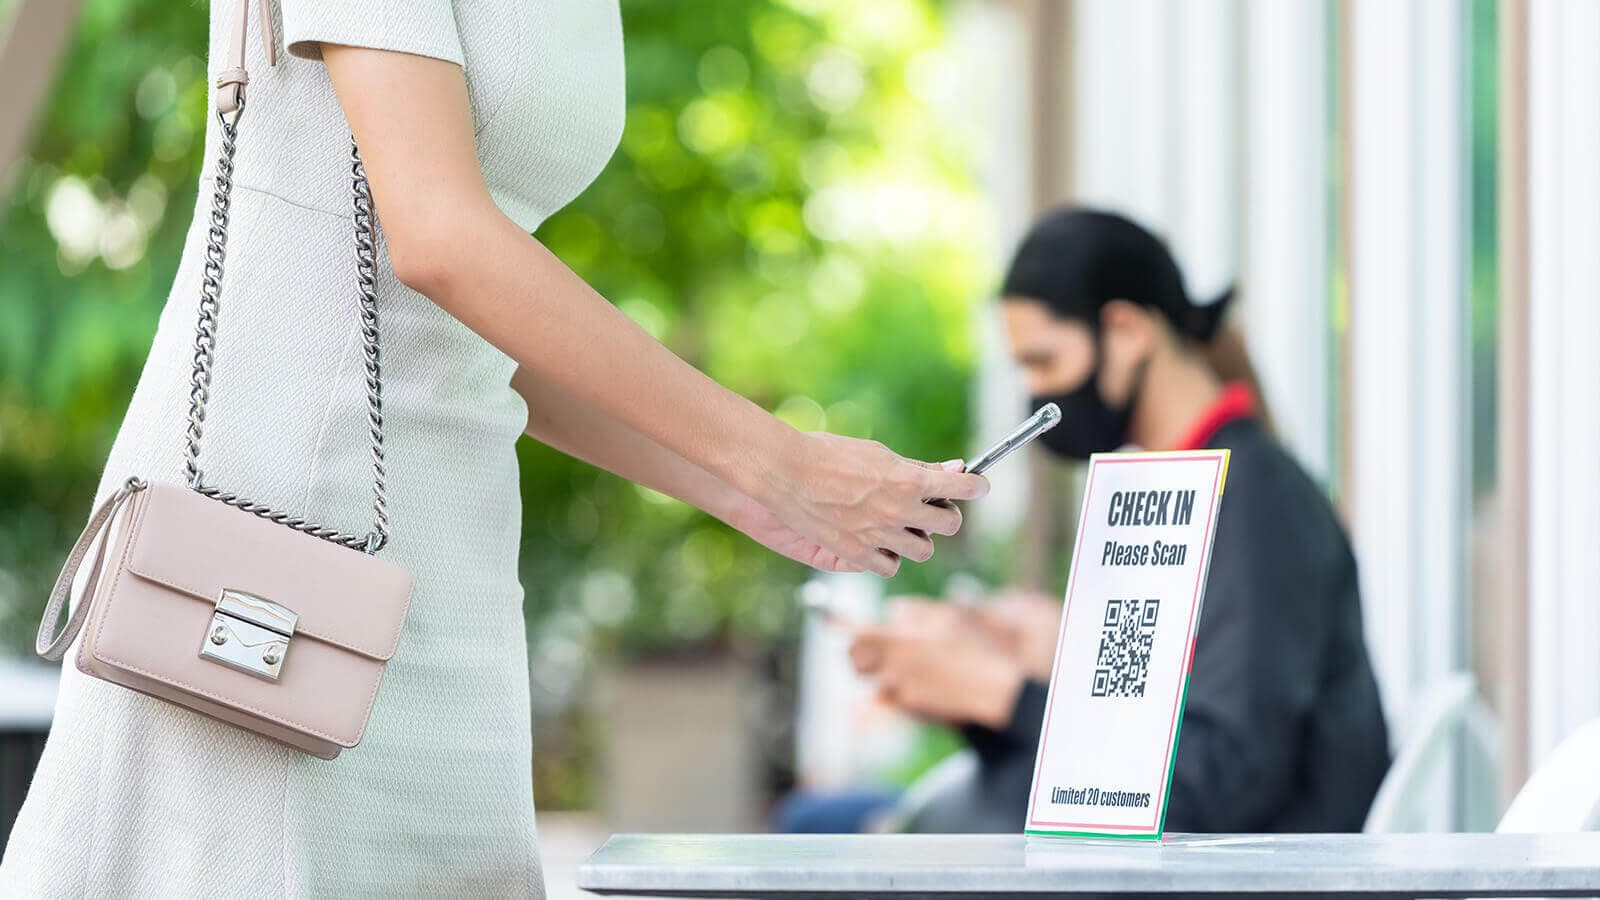 Image for Mandatory Customer Check-in for NSW Businesses